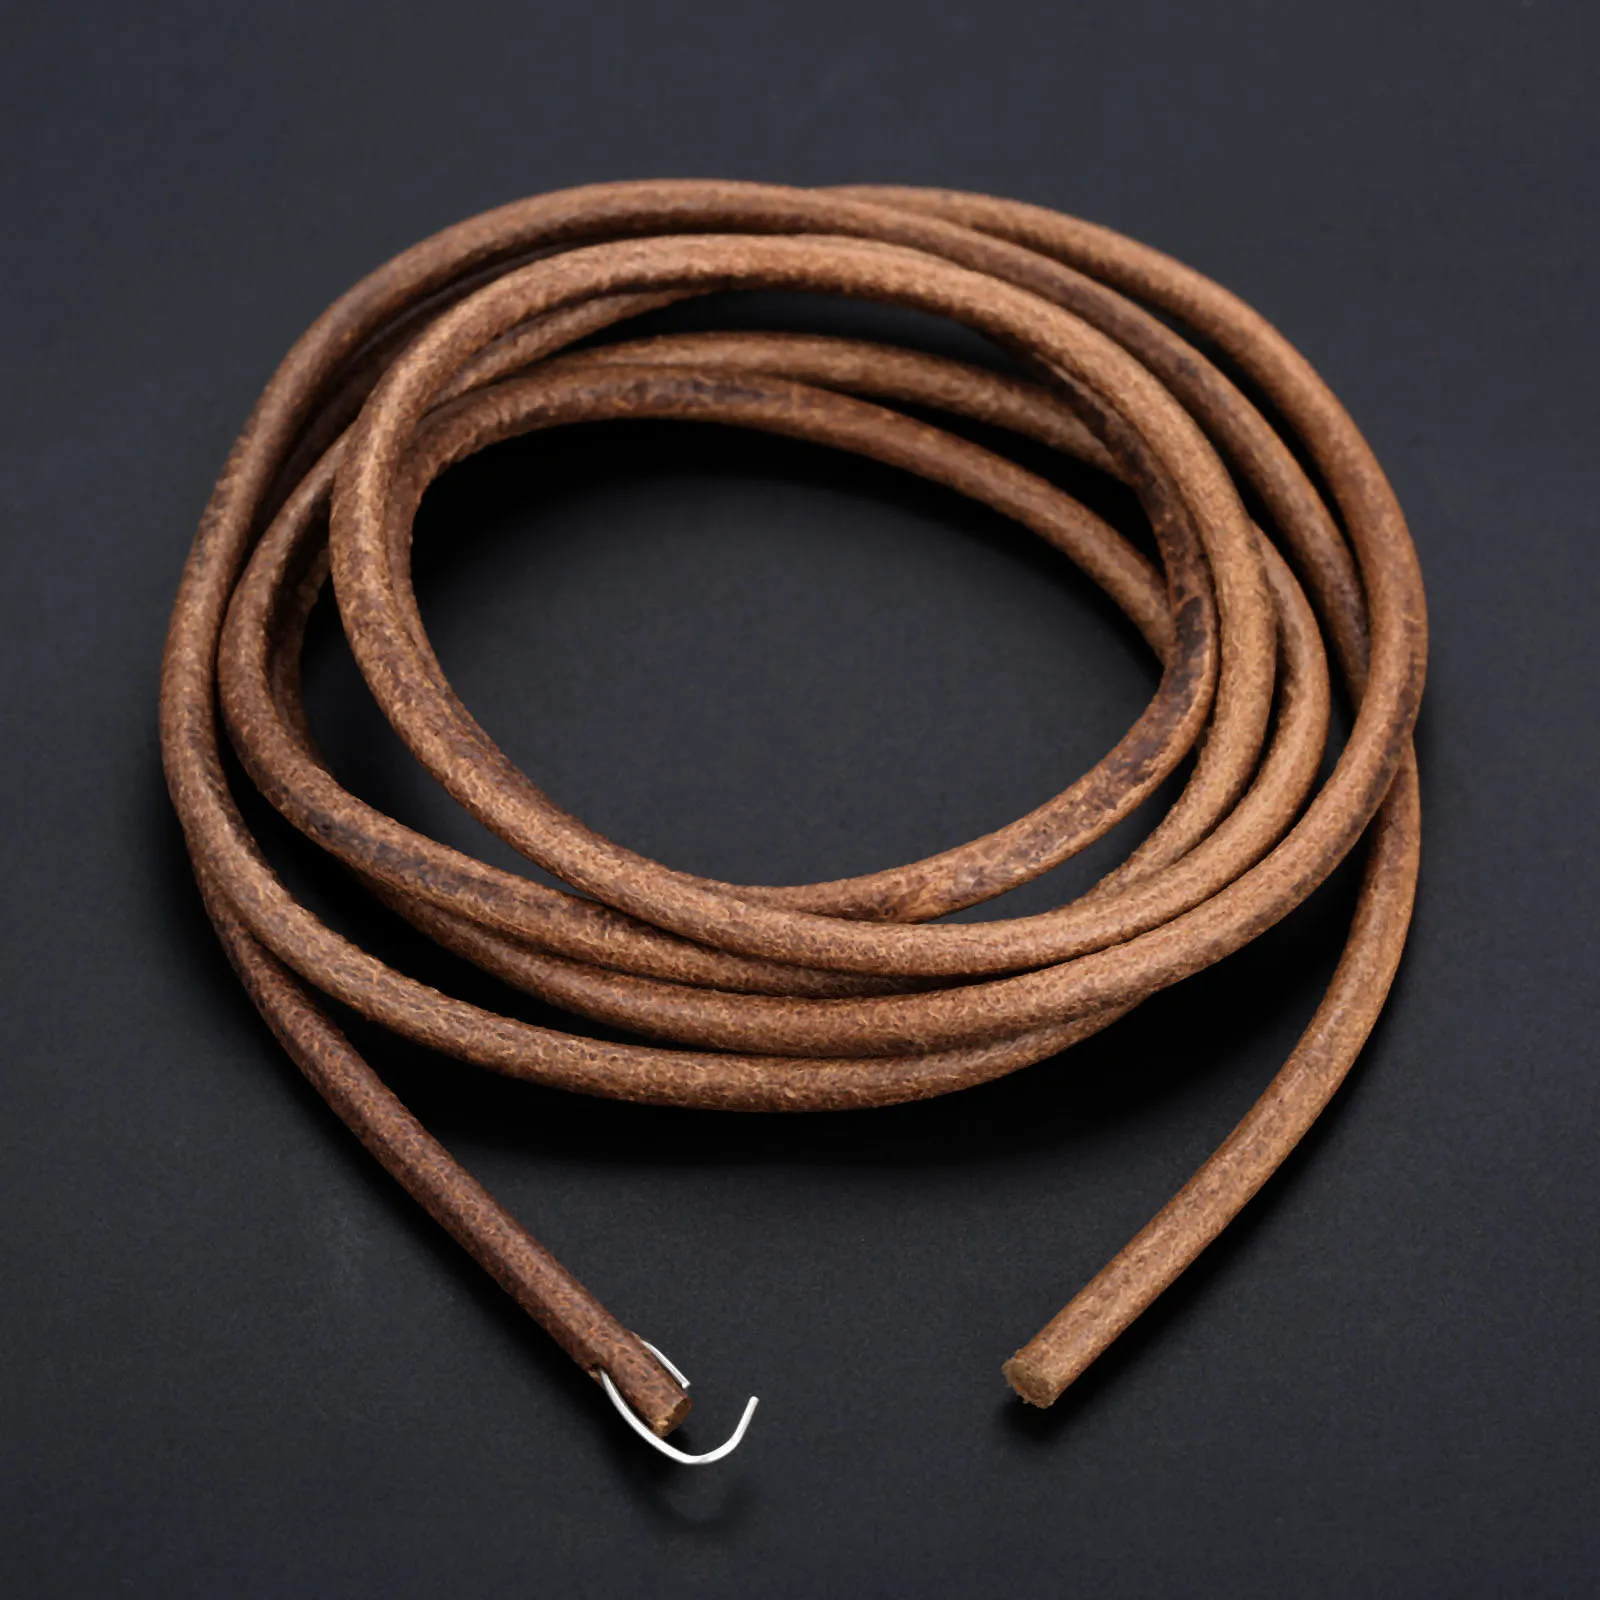 1Pc Leather Treadle Belt with Metal Hook for Old Singer Cabinets And Manual Rocking Foot Pedals Sewing Machine 170cm 4.5mm